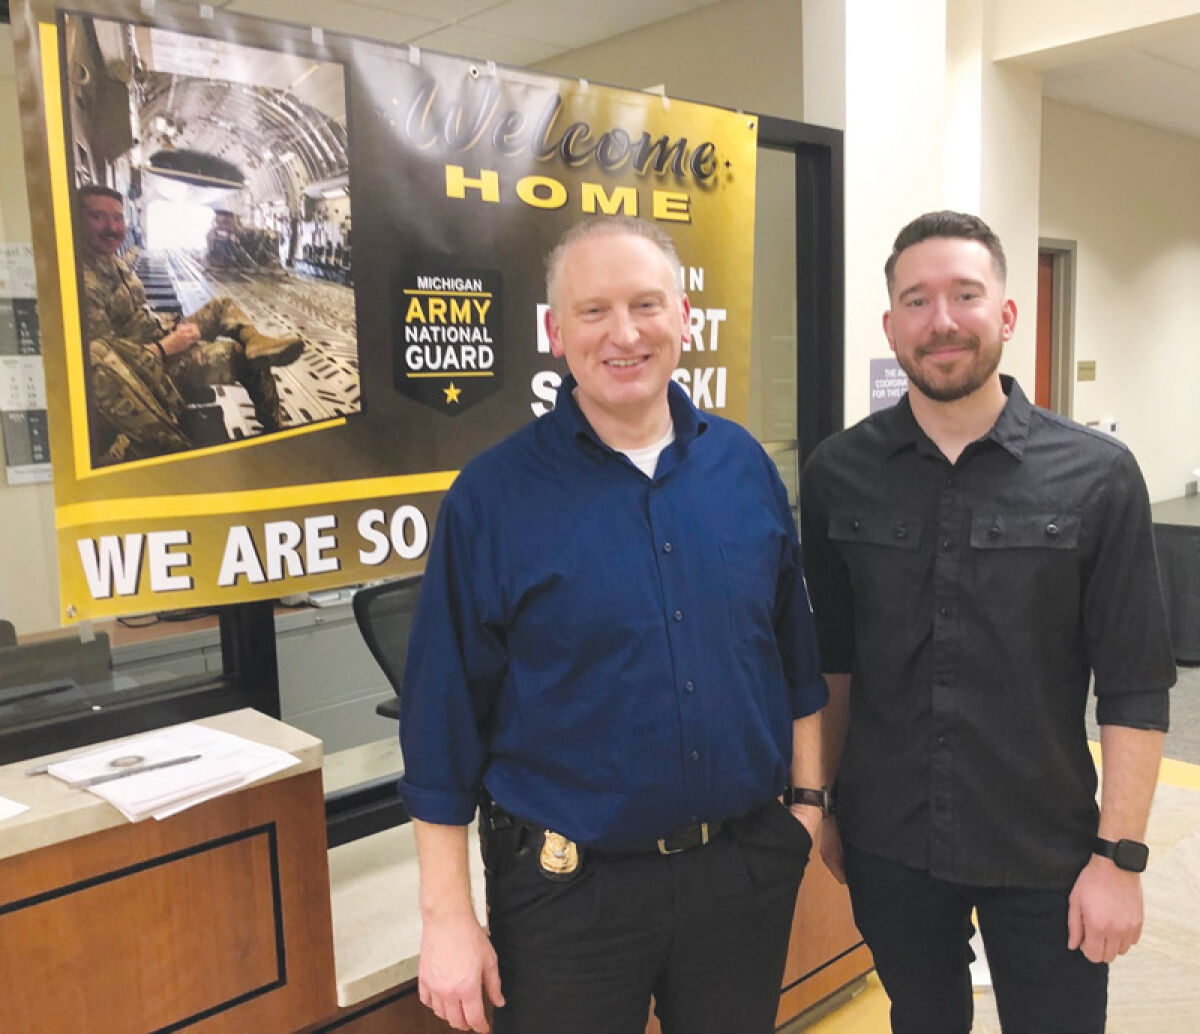  From left, Grosse Pointe City Public Safety Director John Alcorn stands with officer Robert Saleski in front of a poster welcoming him back from his deployment with the National Guard. 